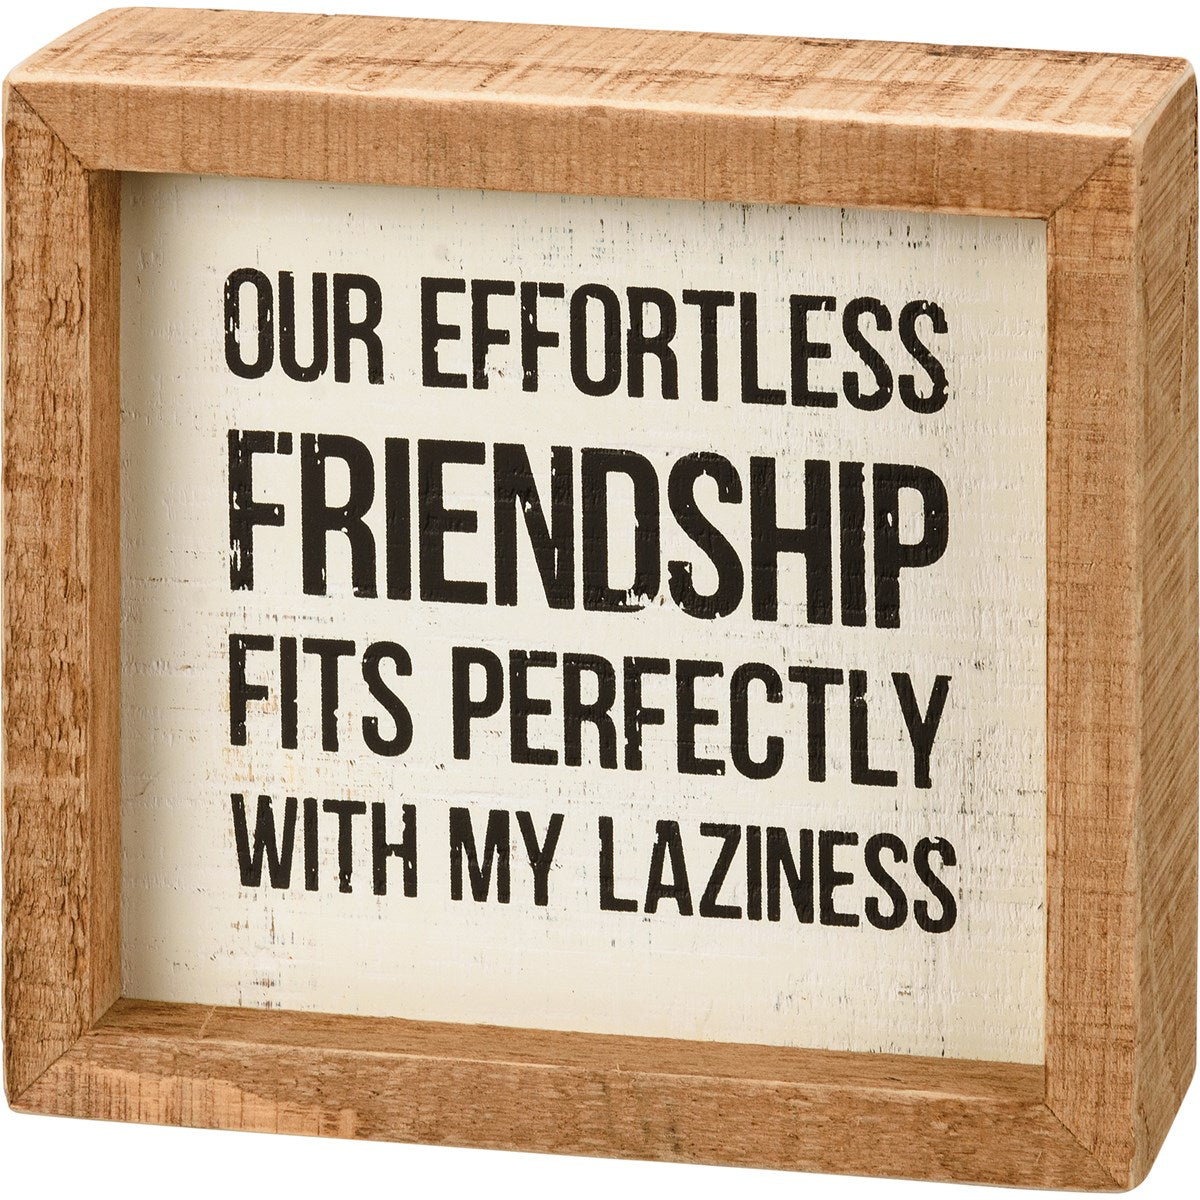 Our Effortless Friendship Fits Inset Box Sign